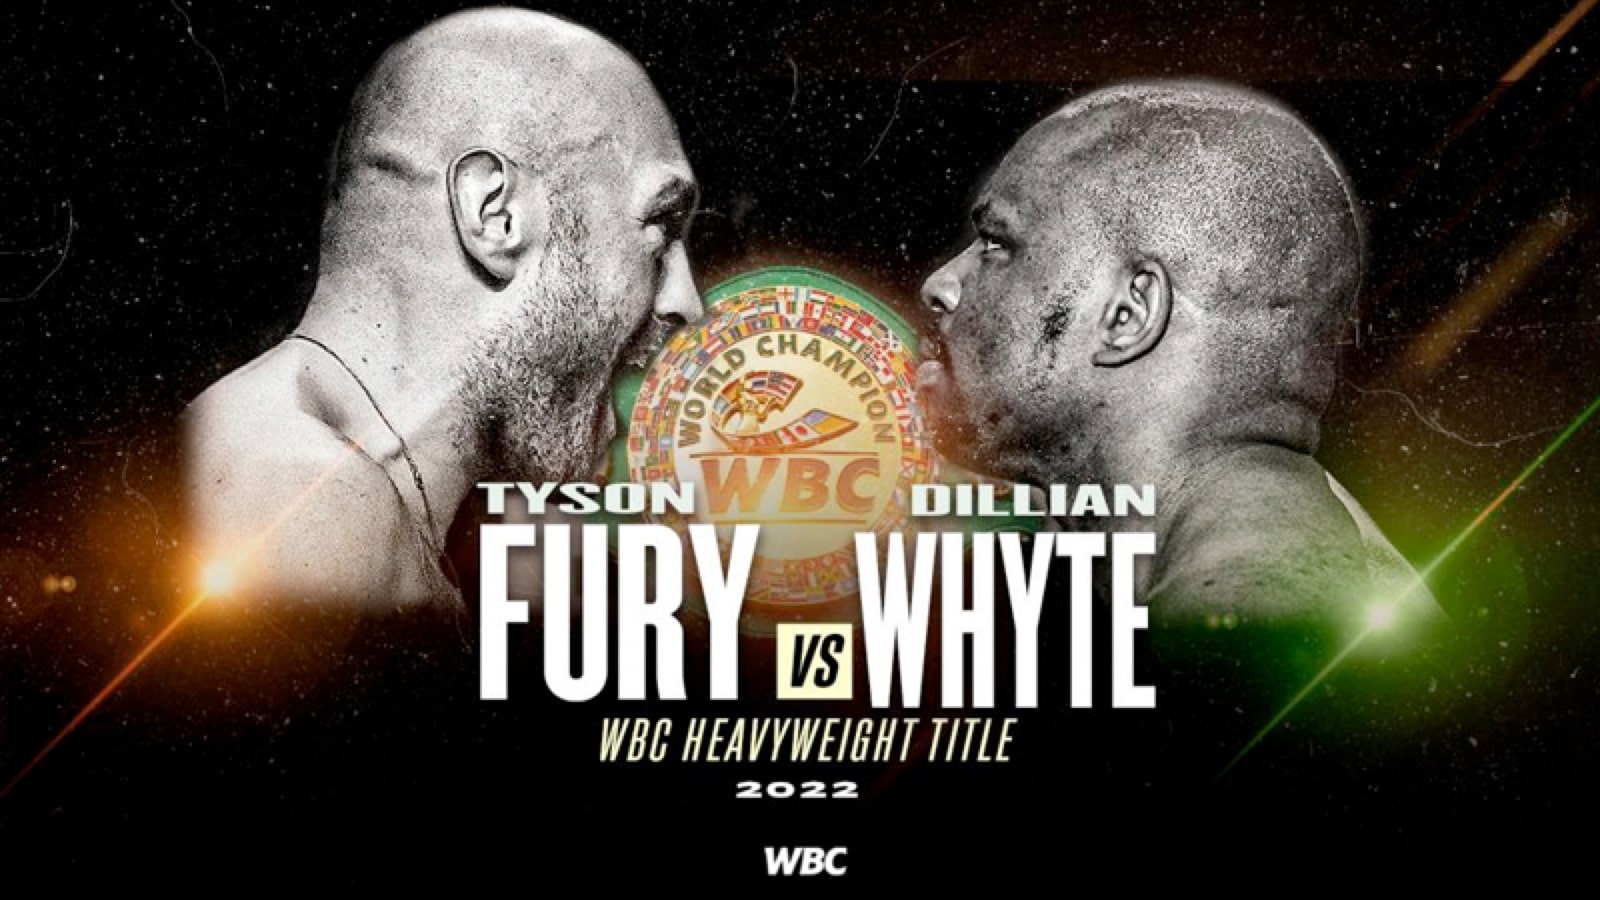 Image: Hearn says Fury - Whyte promotion "NOT going well at the moment"